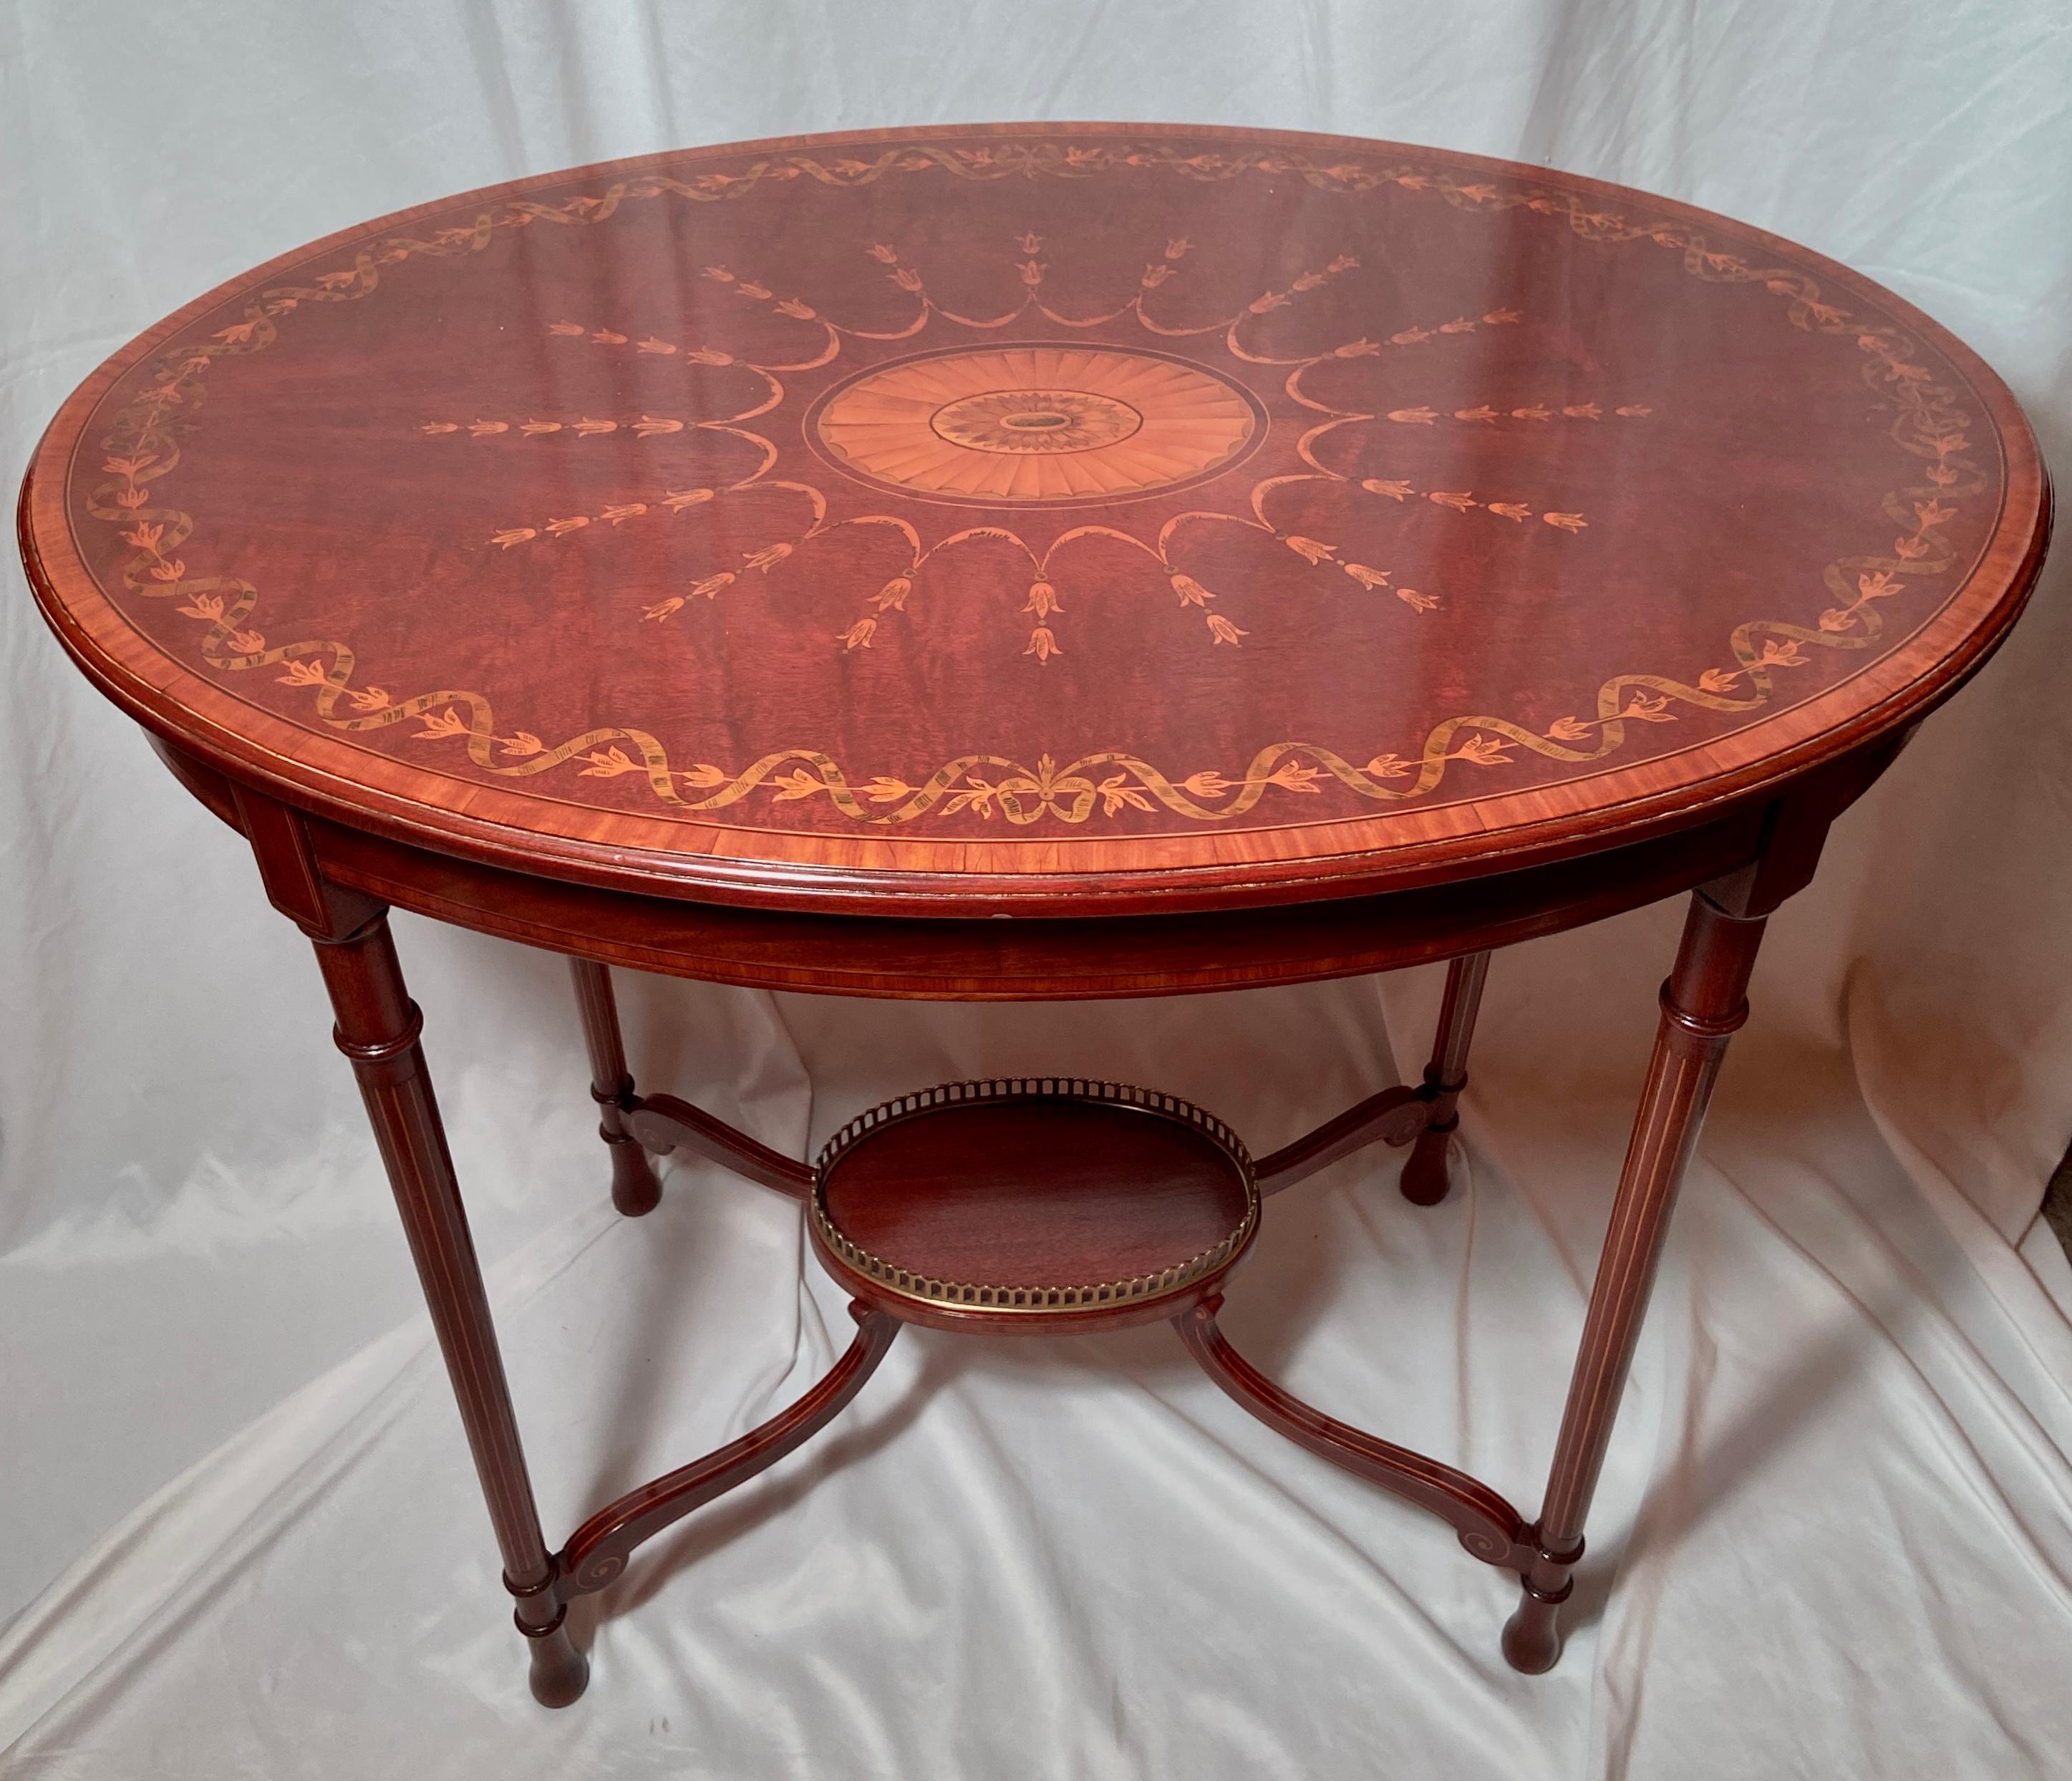 Antique English mahogany with exquisite inlay oval occasional table, Circa 1880.